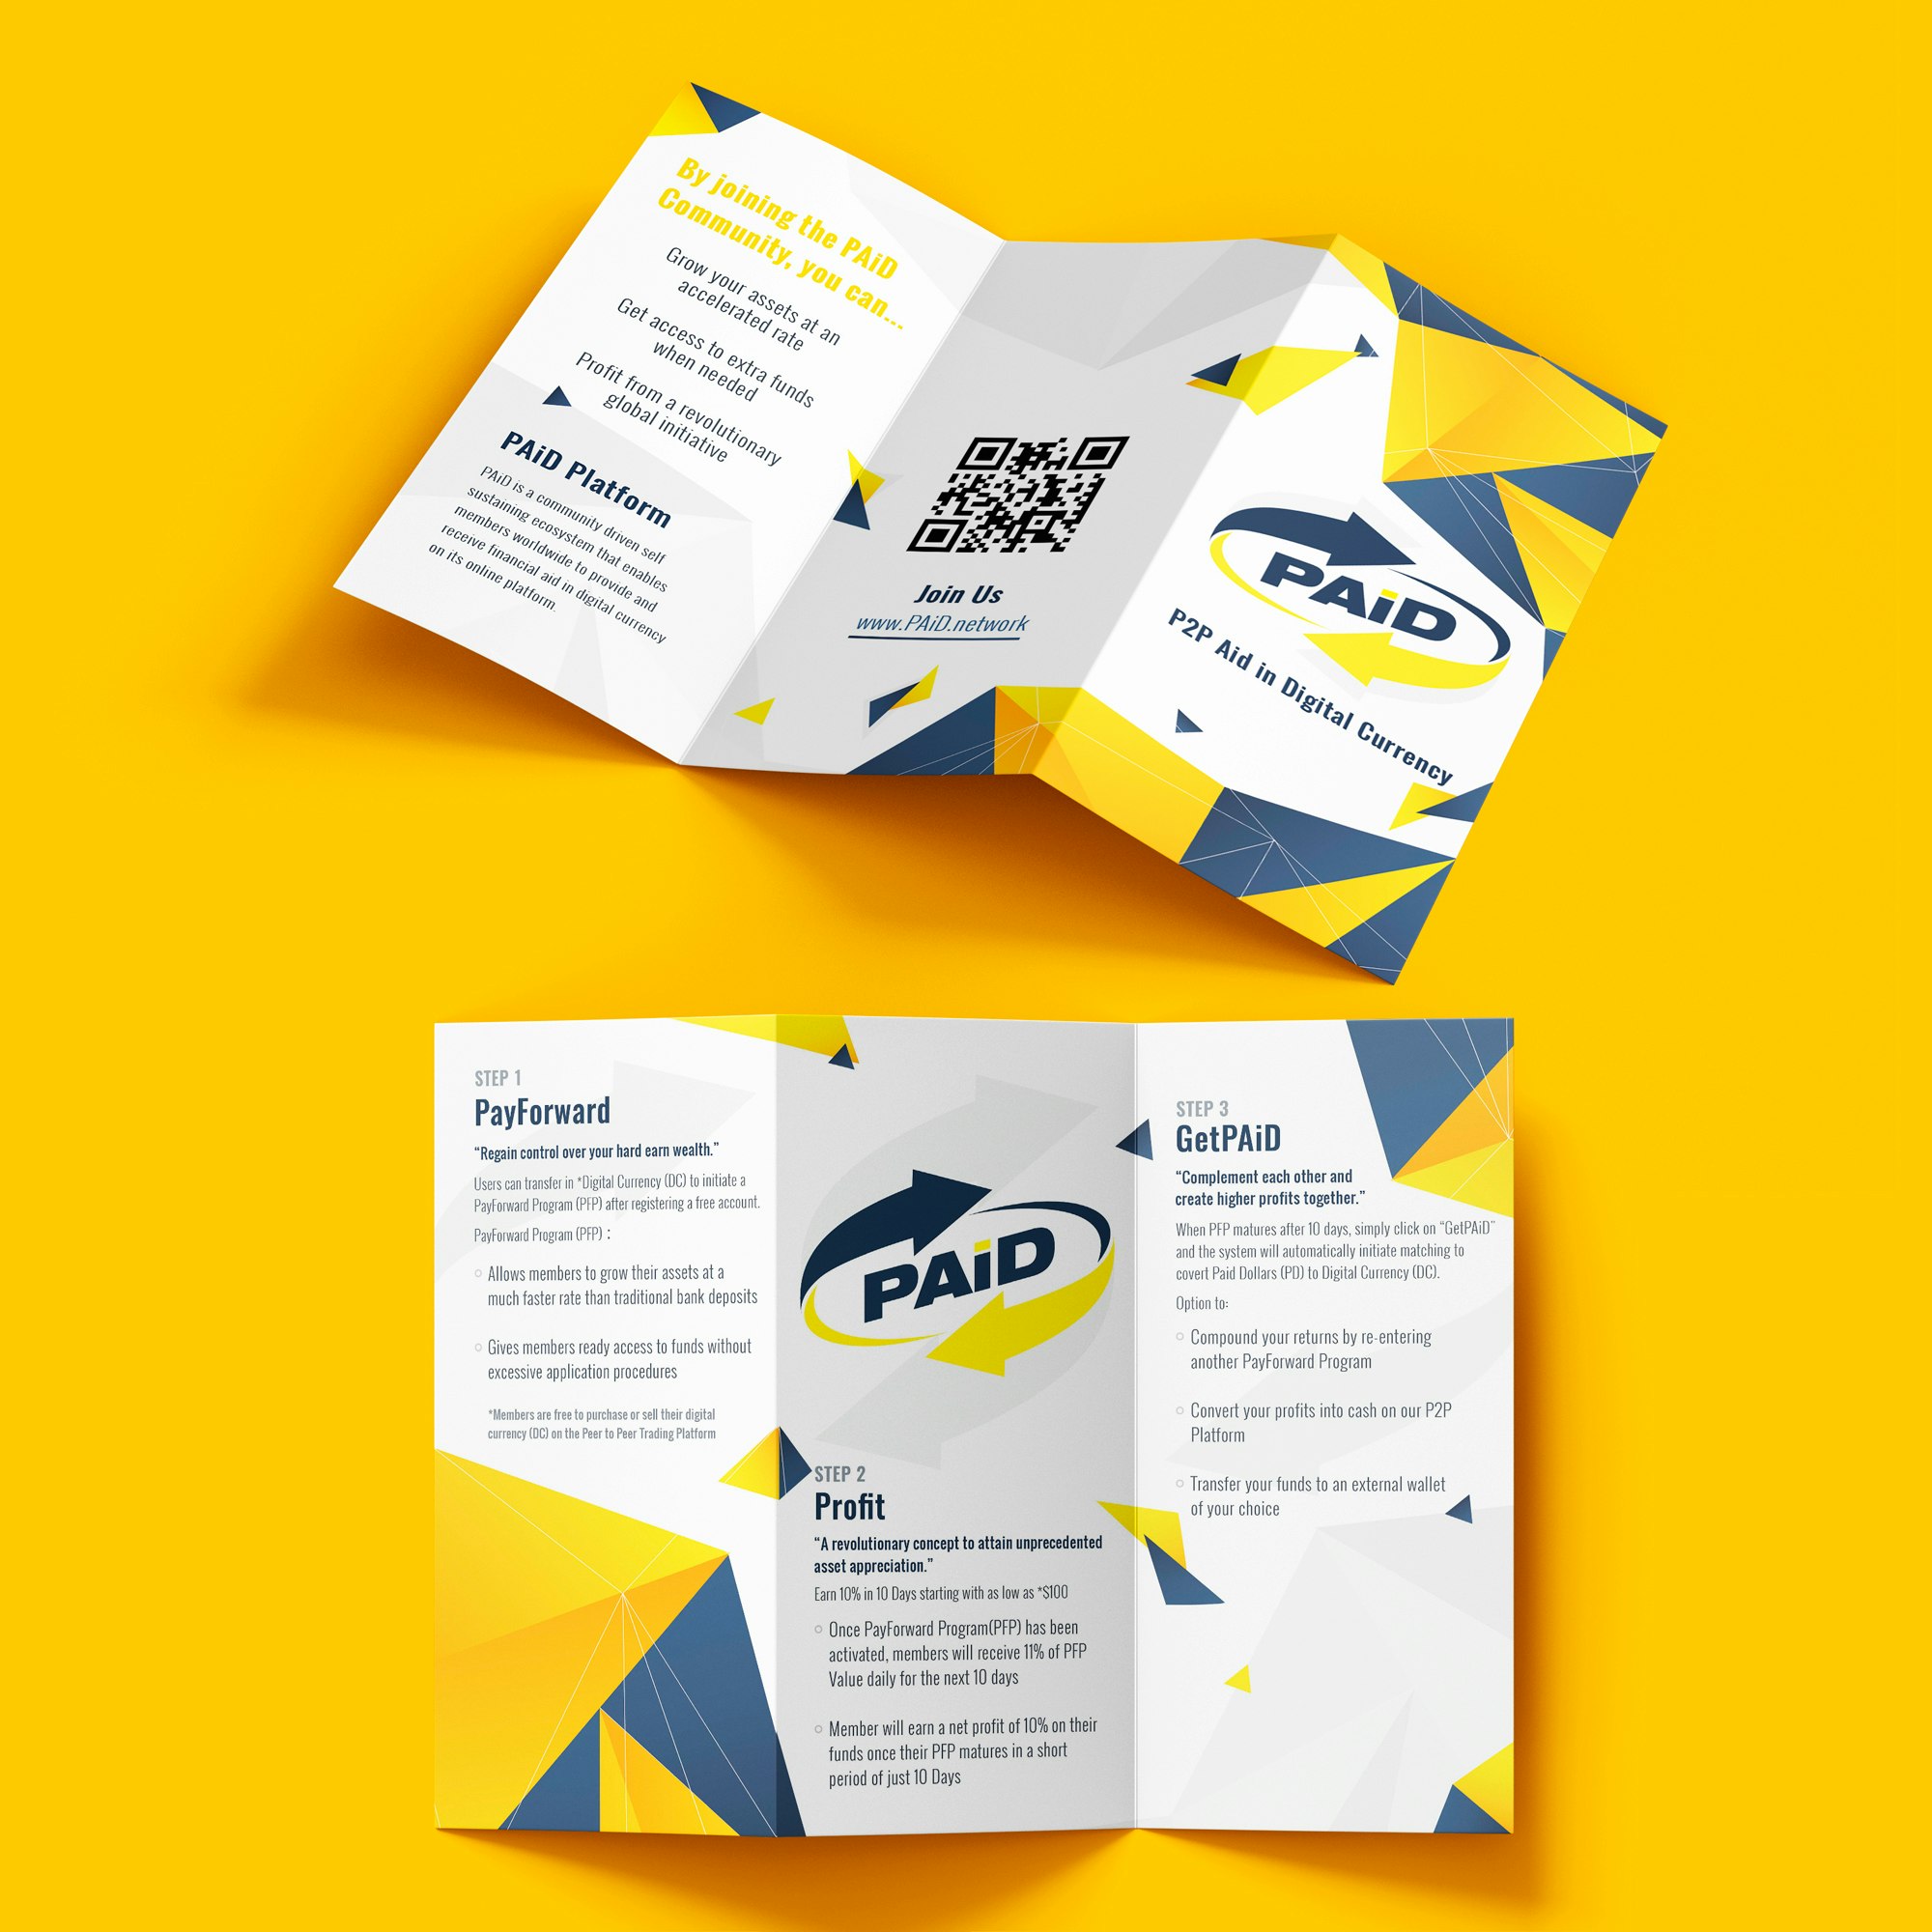 Flyers with Free artwork design service A5 Leaflet Print Personalised A6